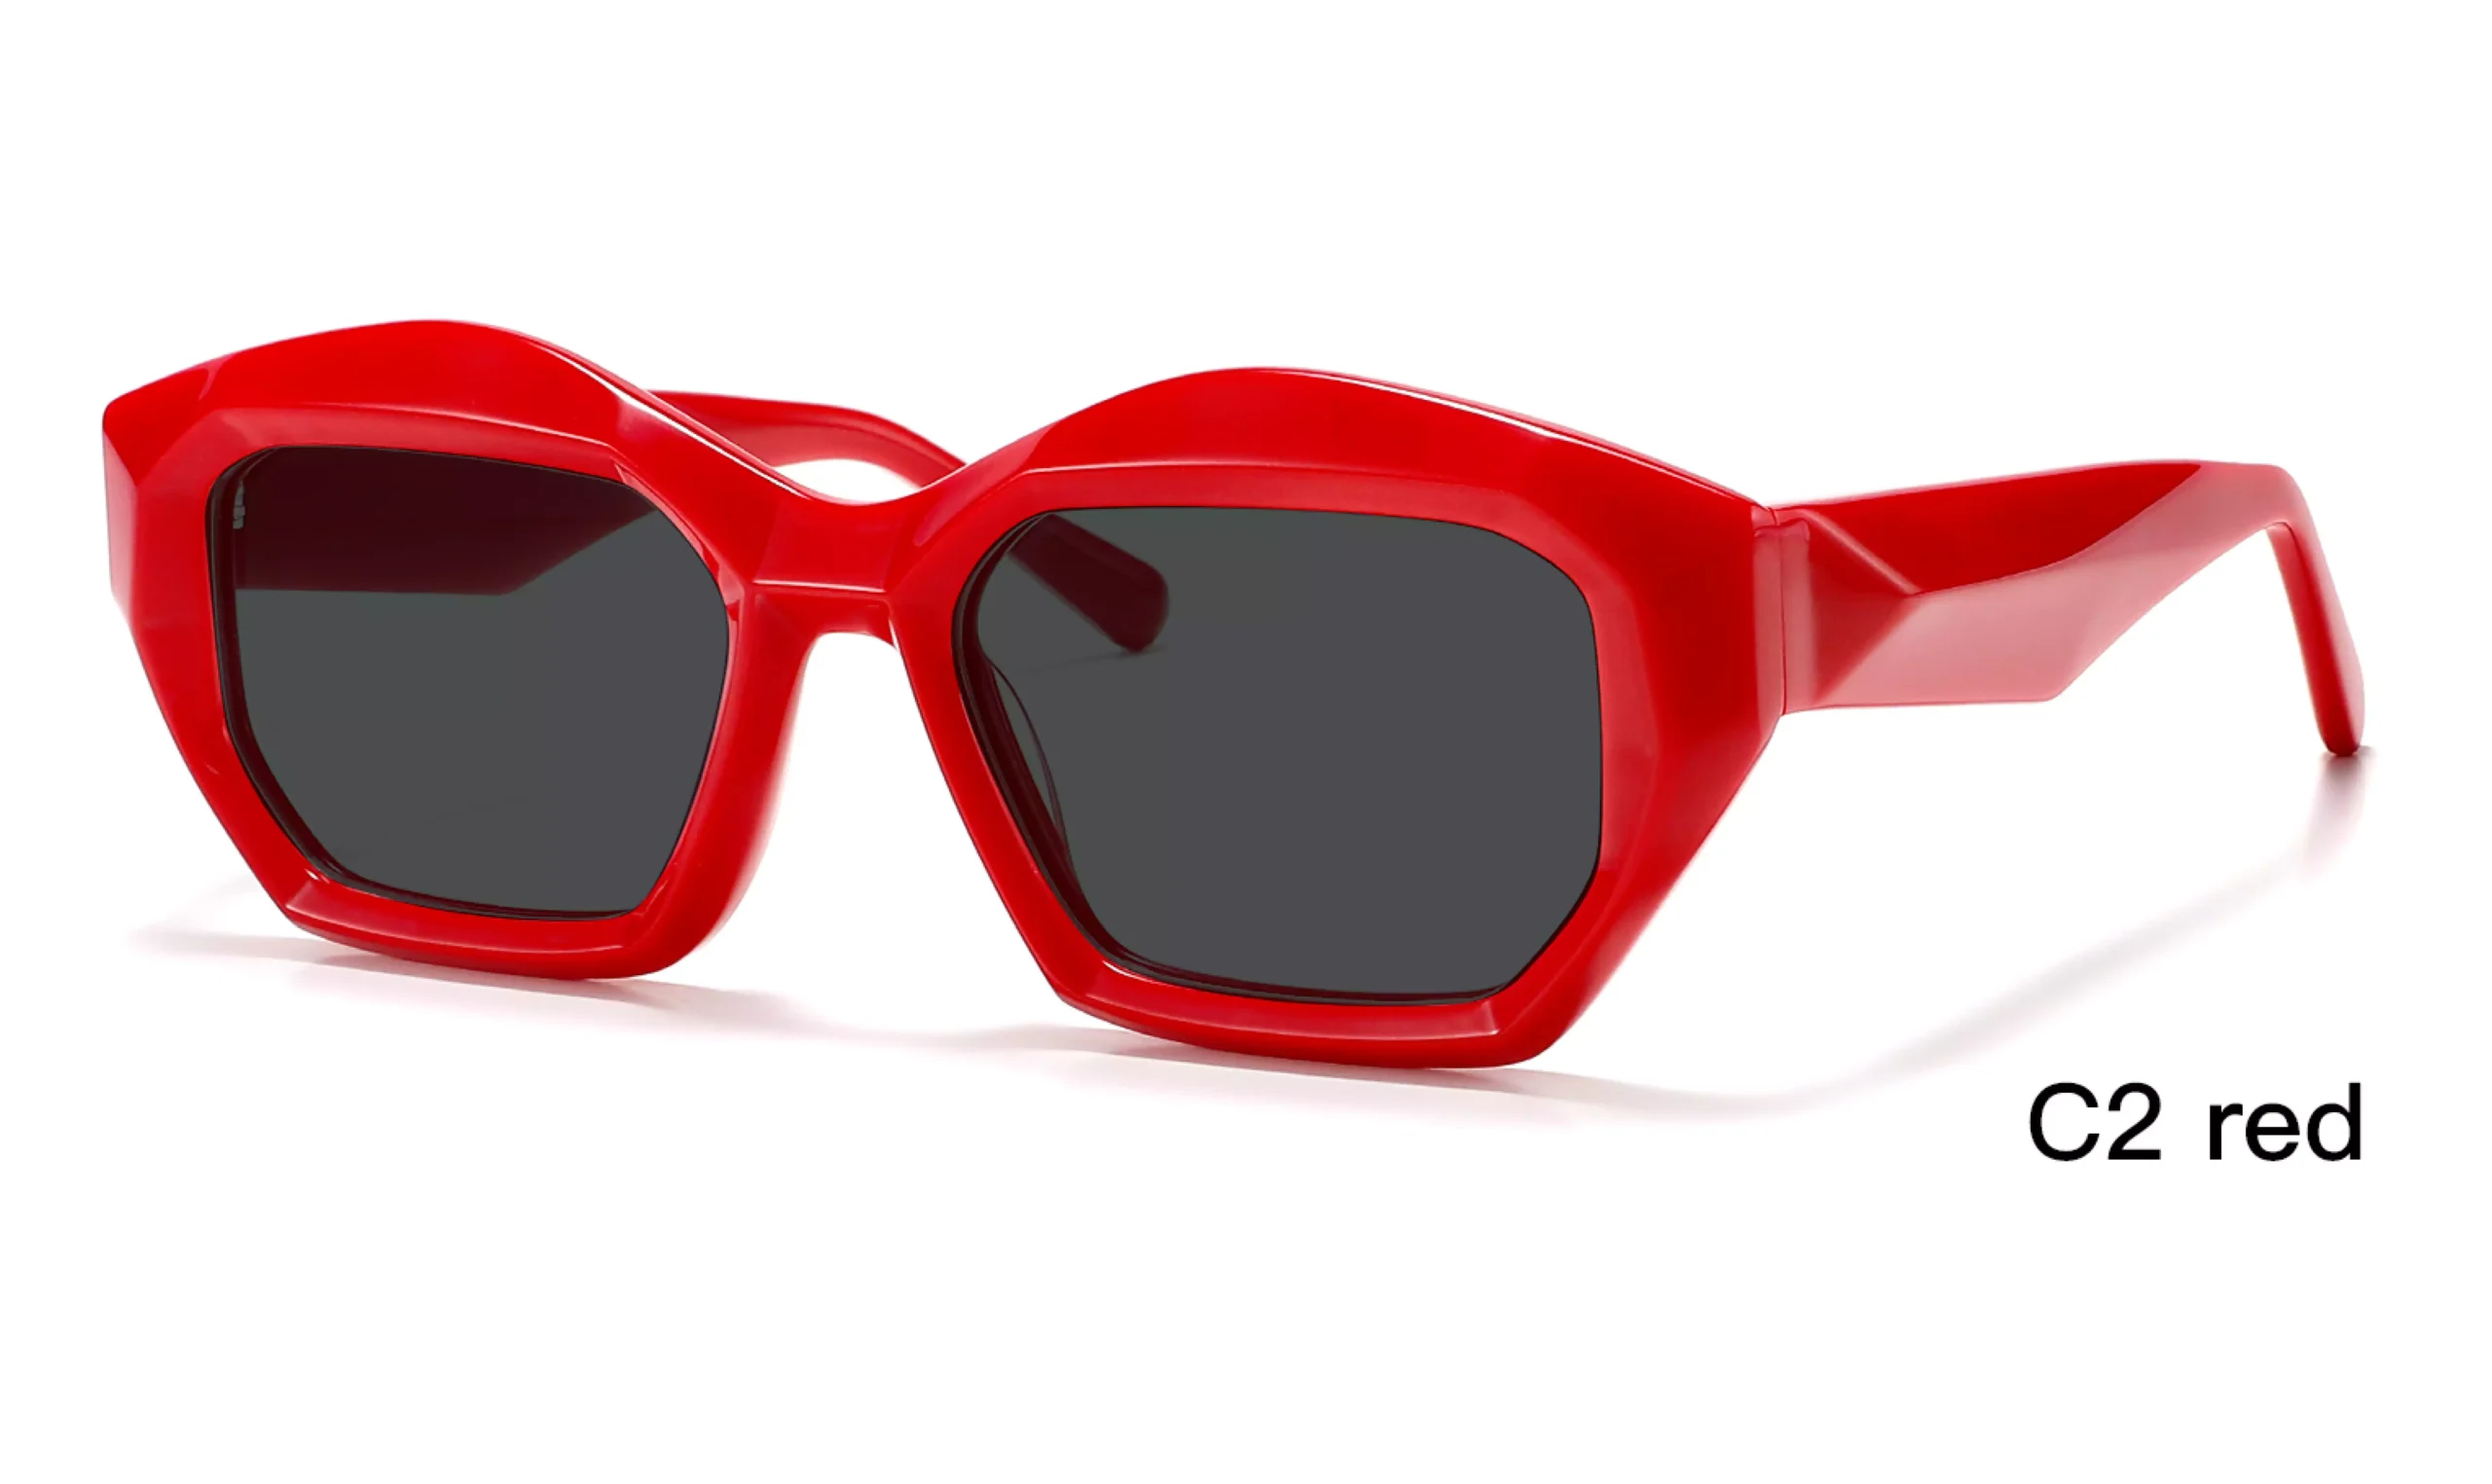 wholesale replica sunglasses, acetate, unisex, thick rimmed, red, made in Wenzhou Zhejiang China, for opticians